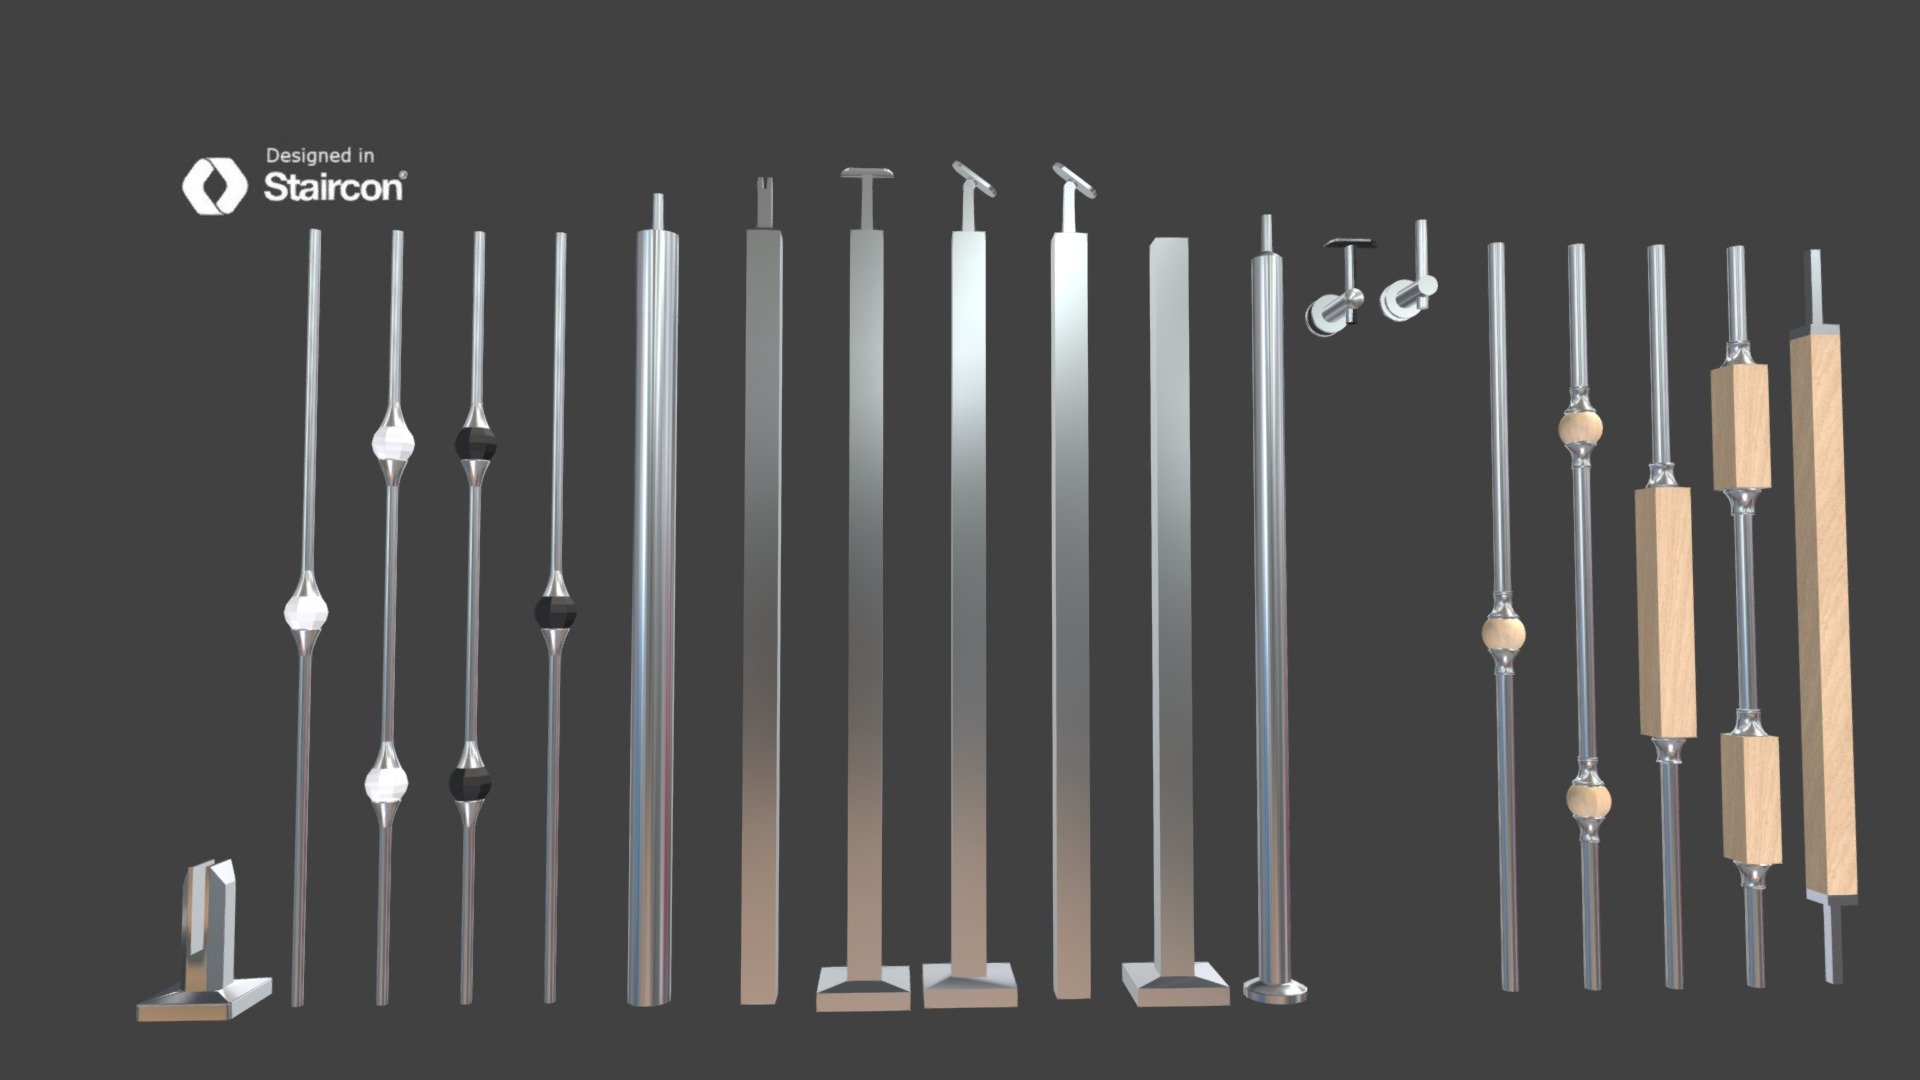 US_Balusters Stainless Steel - 3D model by Staircon 3d model